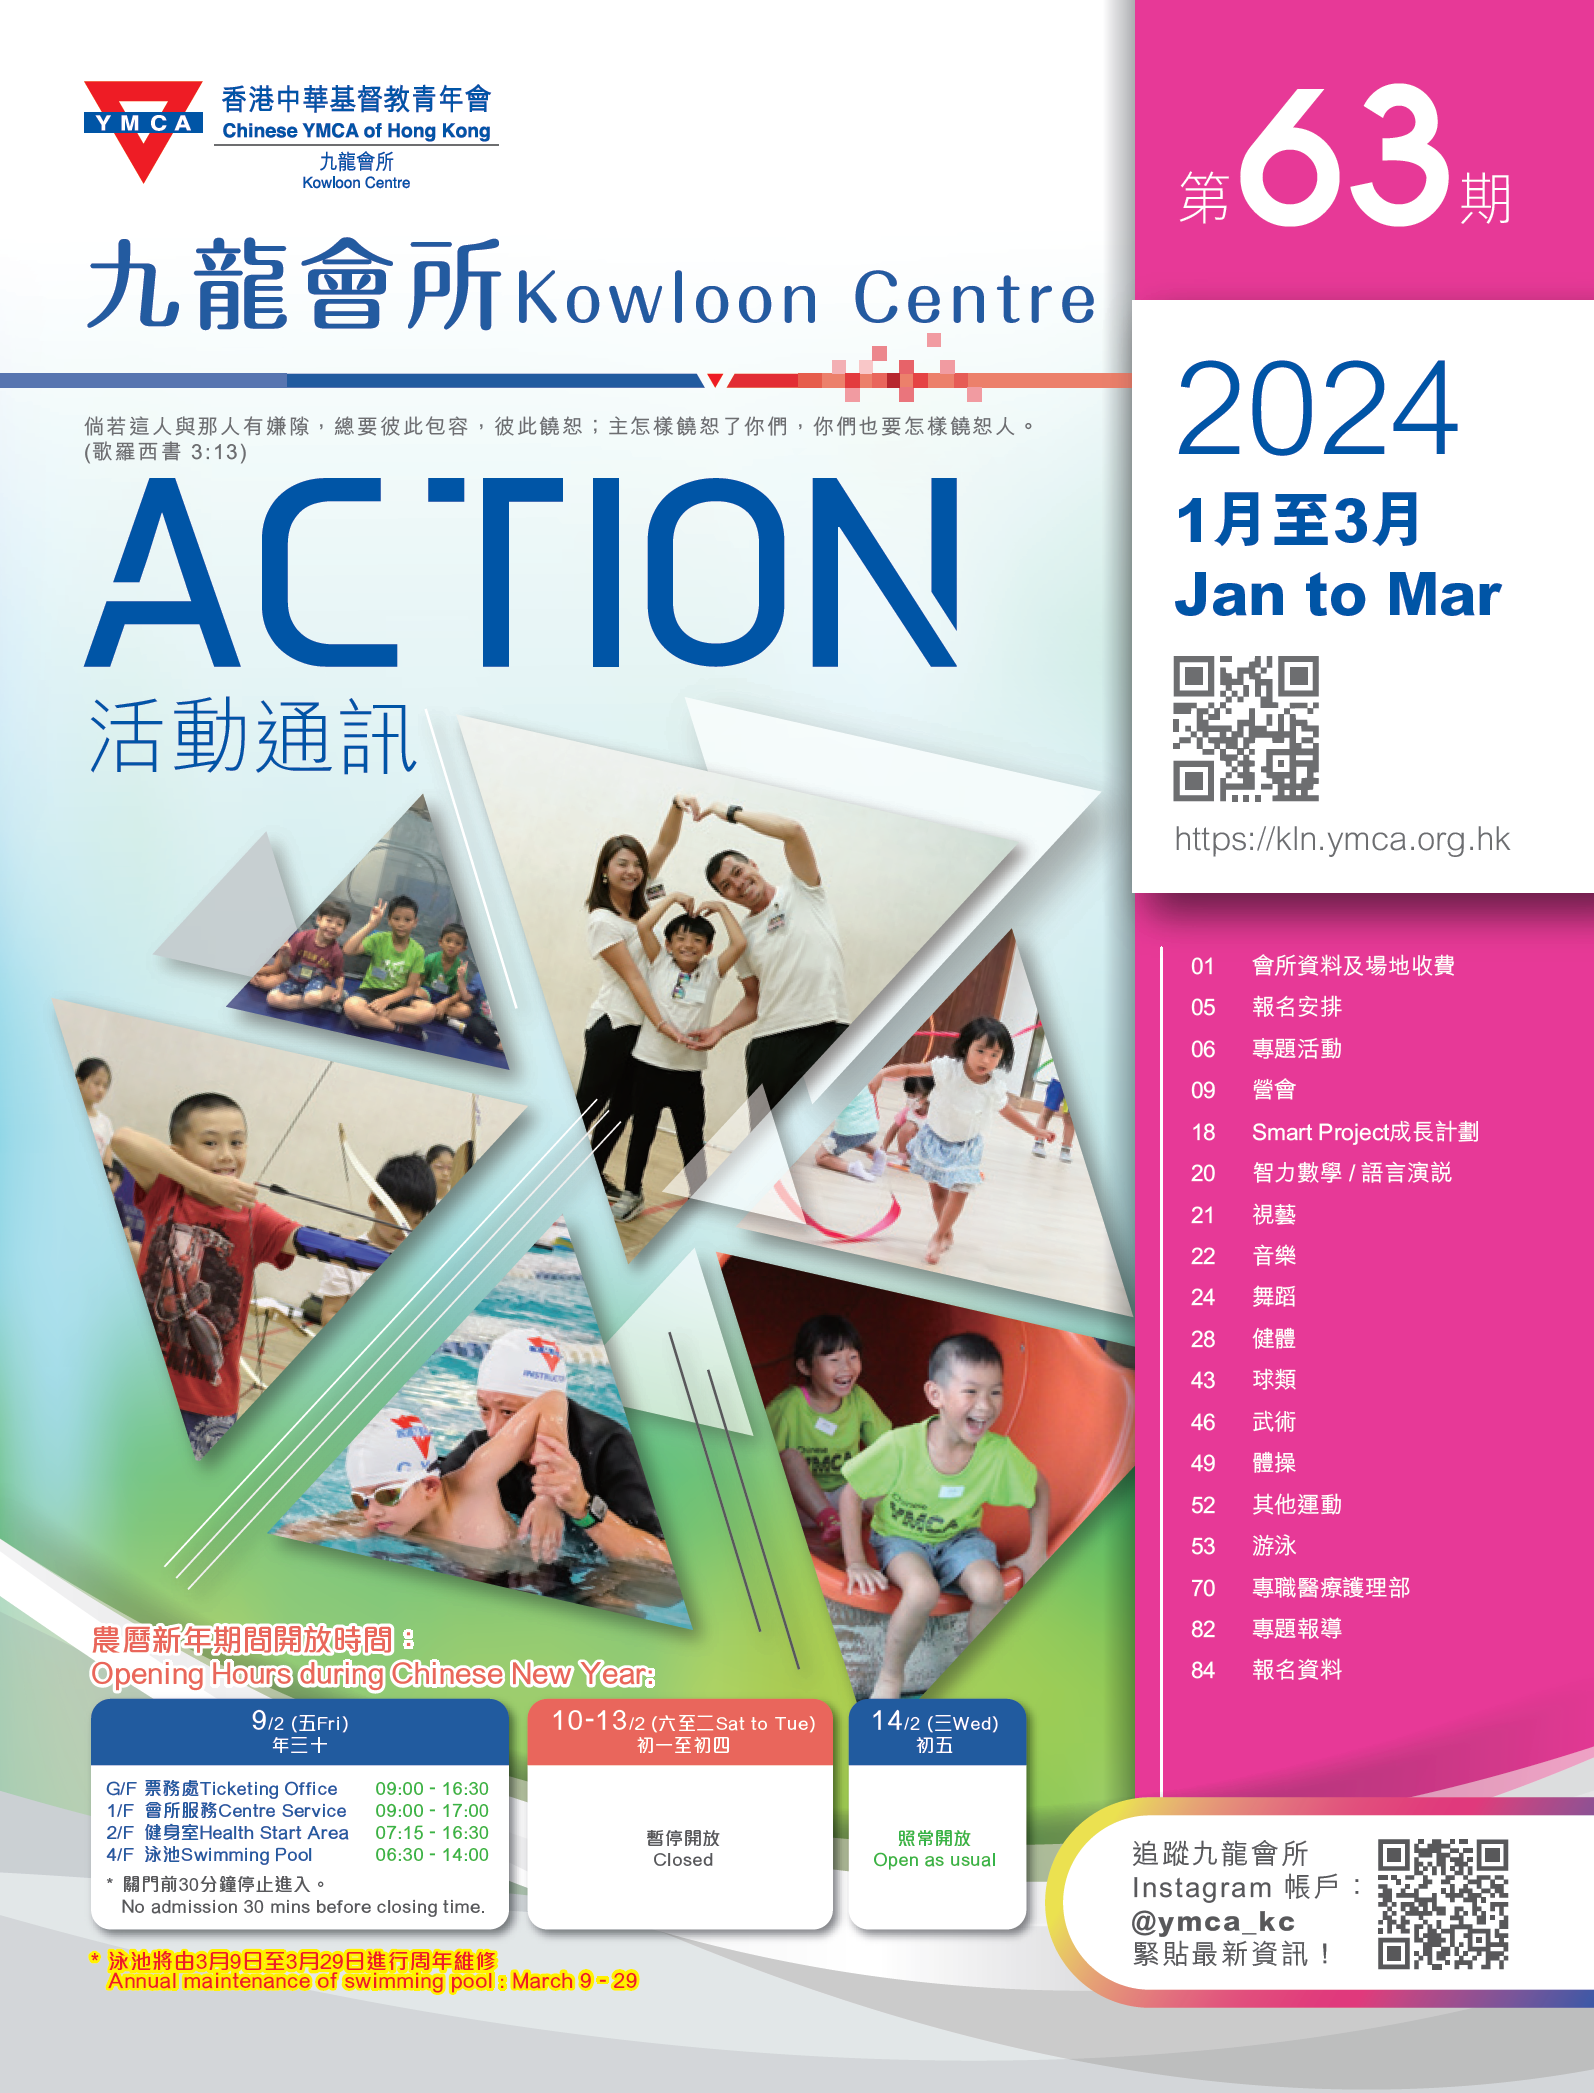 ACTION 2024 JAN to MAR